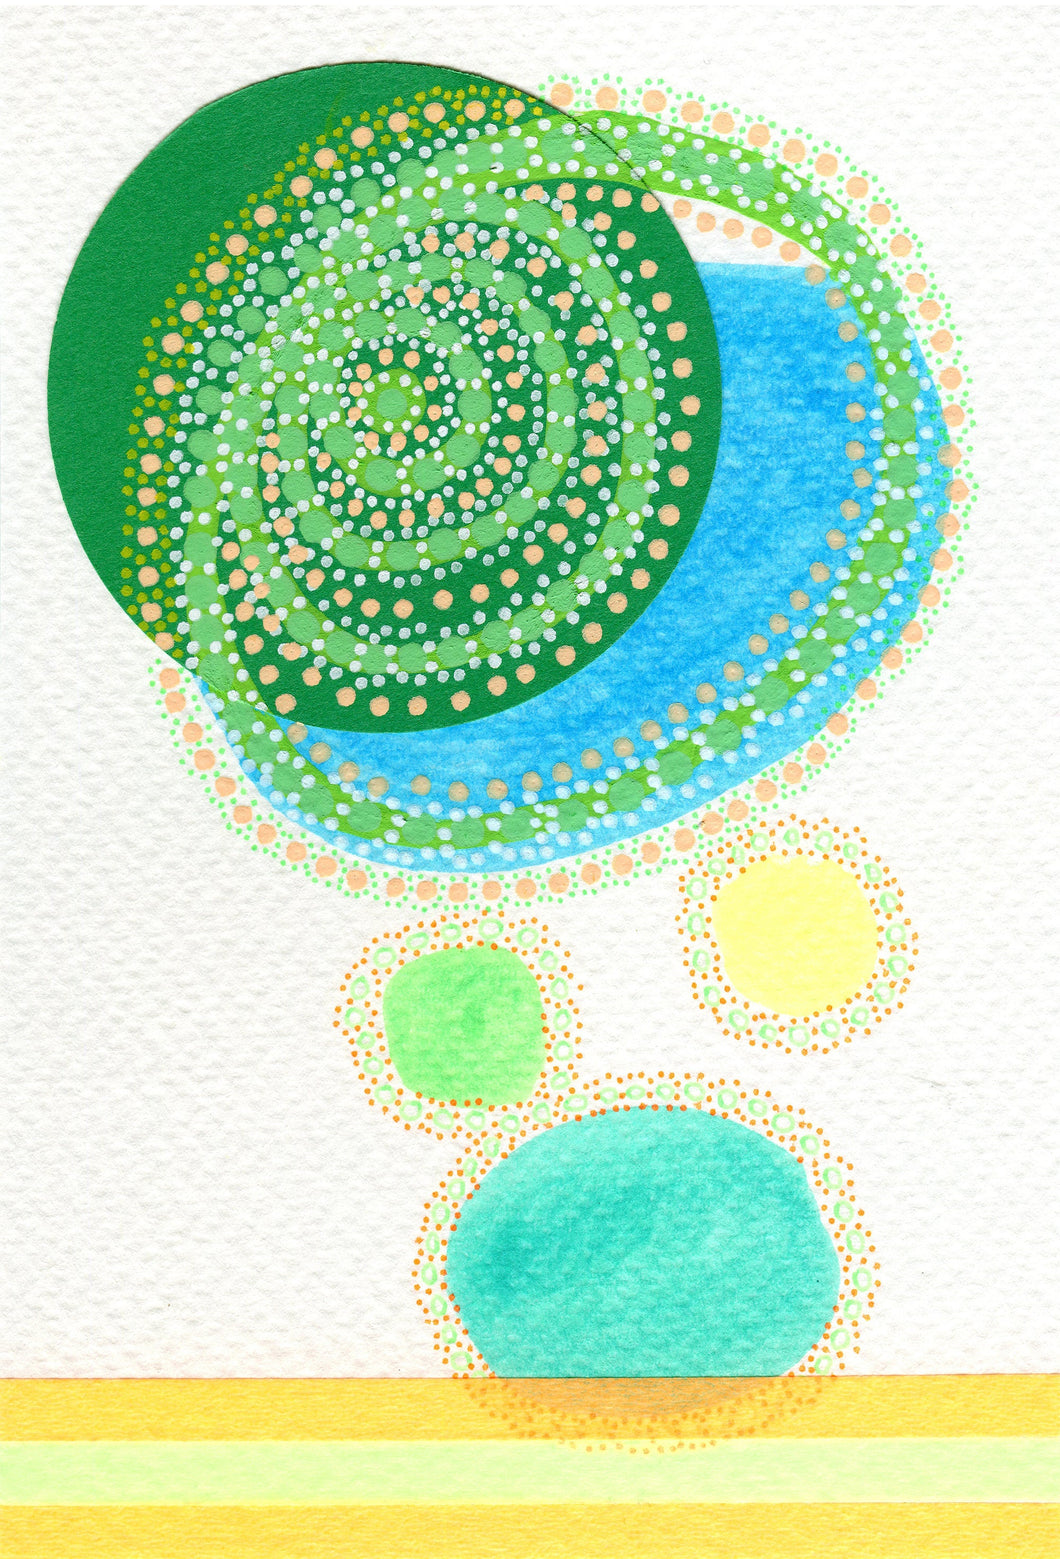 Green Turquoise Contemporary Collage On Watercolor Paper - Naomi Vona Art